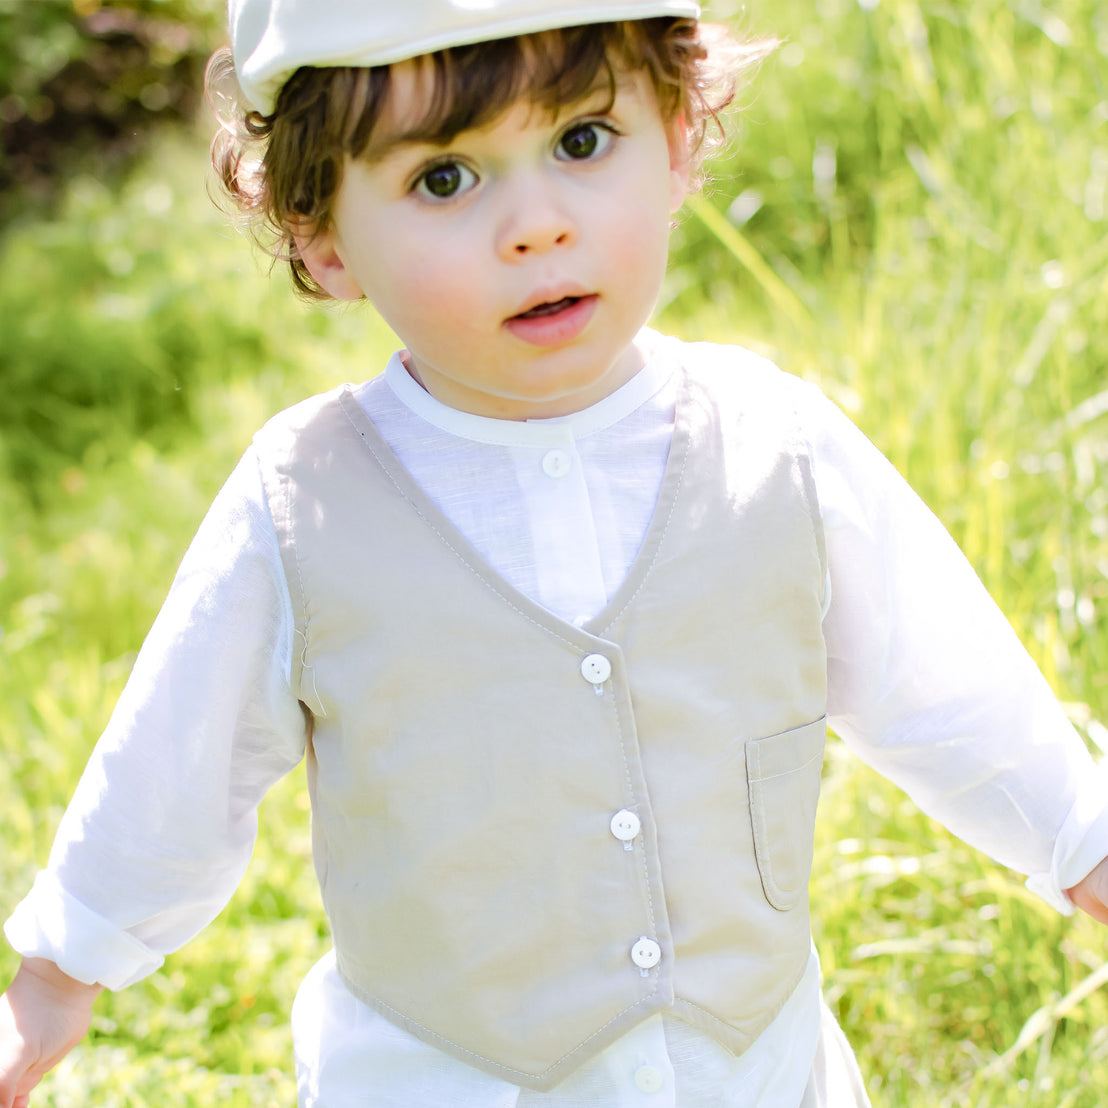 Photo of a baby boy outside in the grass wearing the Silas Vest Suit and matching newsboy cap